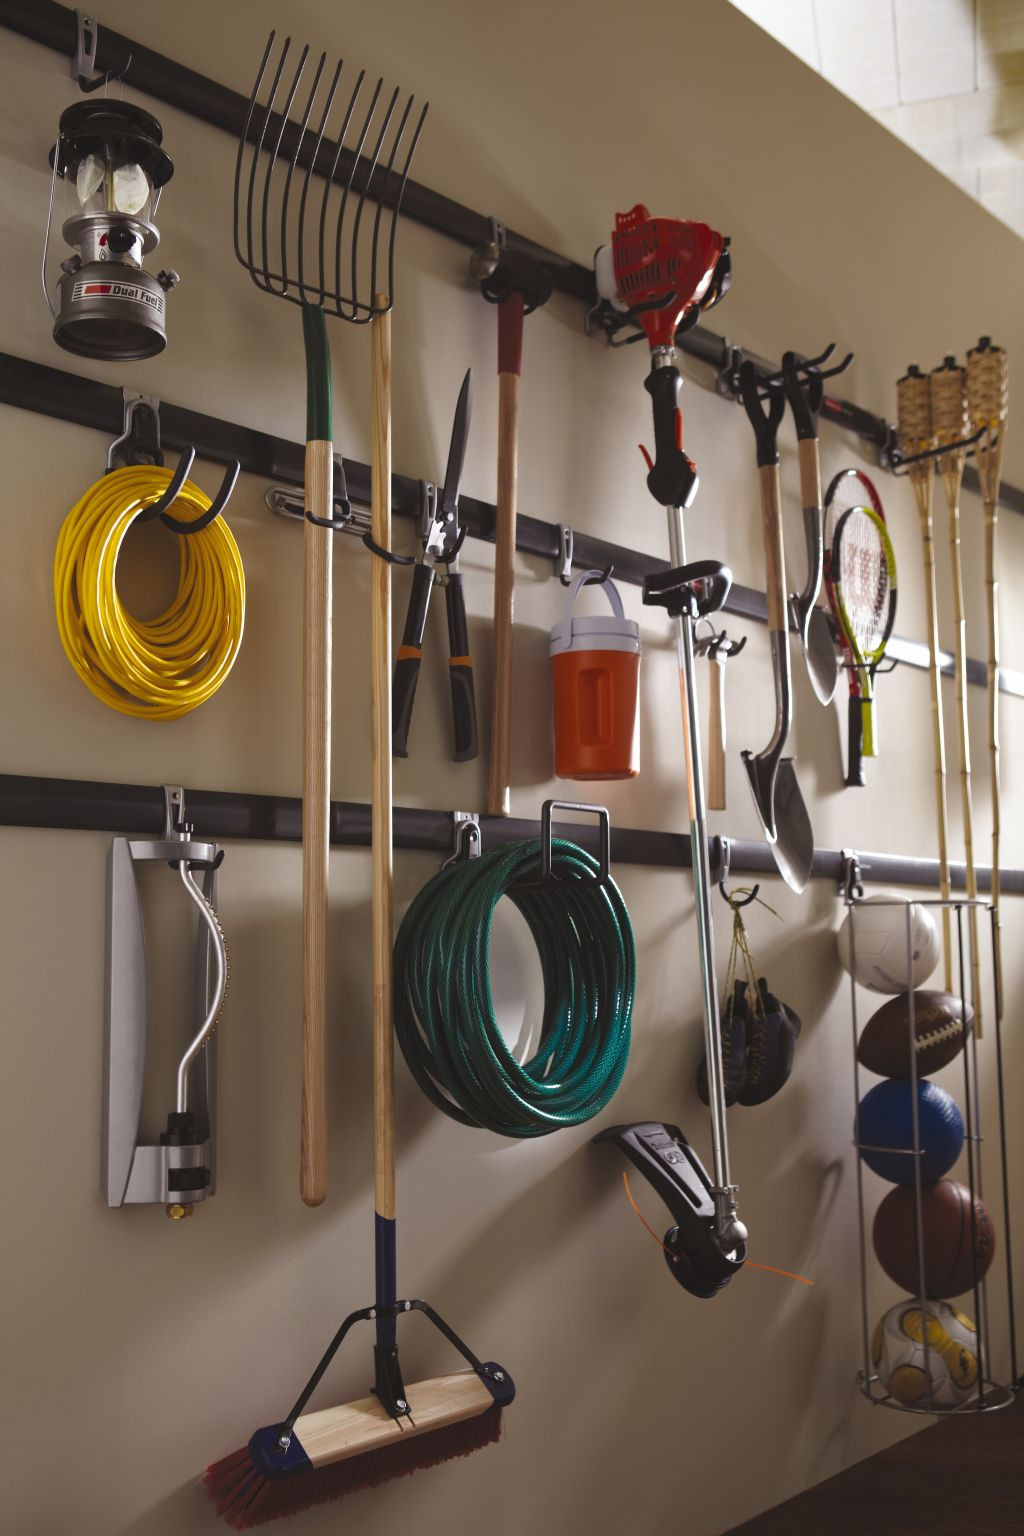 Garage Wall Organizers System
 Time To Sort Out The Mess – 20 Tips For A Well Organized